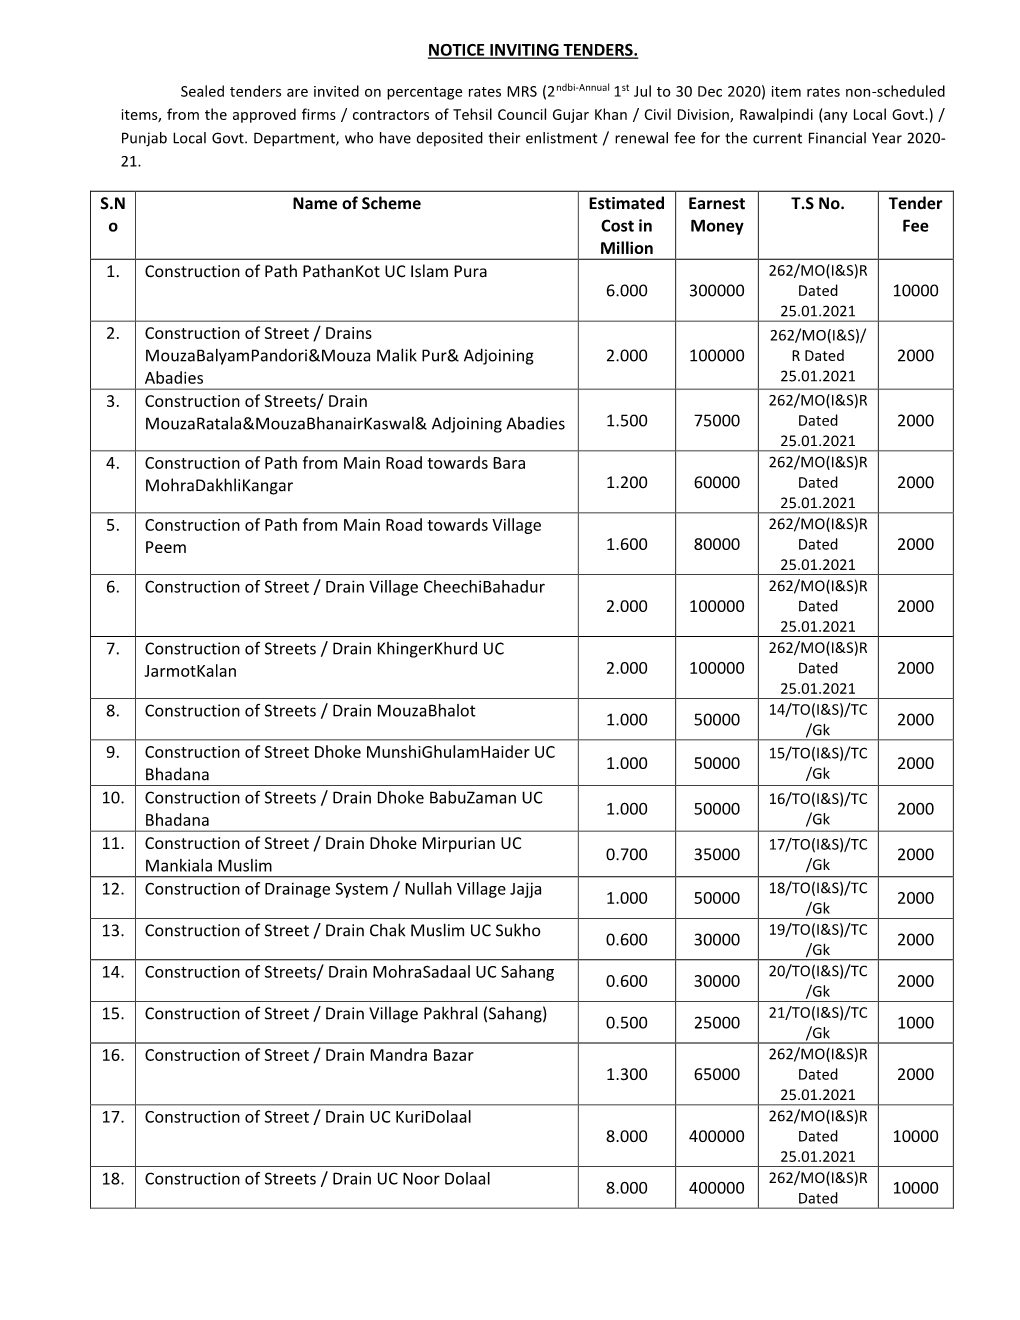 NOTICE INVITING TENDERS. S.N O Name of Scheme Estimated Cost In